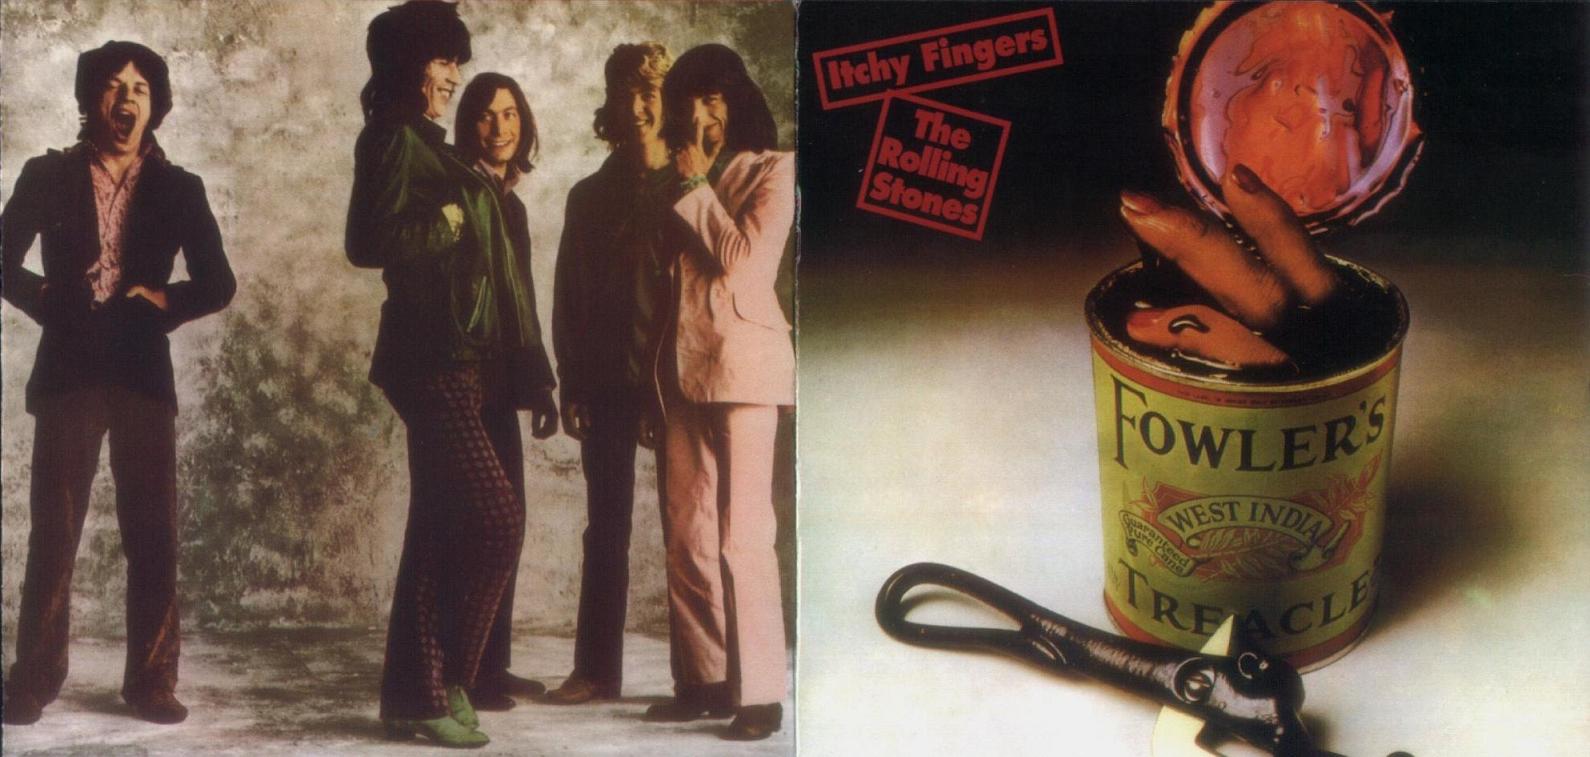 1969-1970-Itchy fingers-front